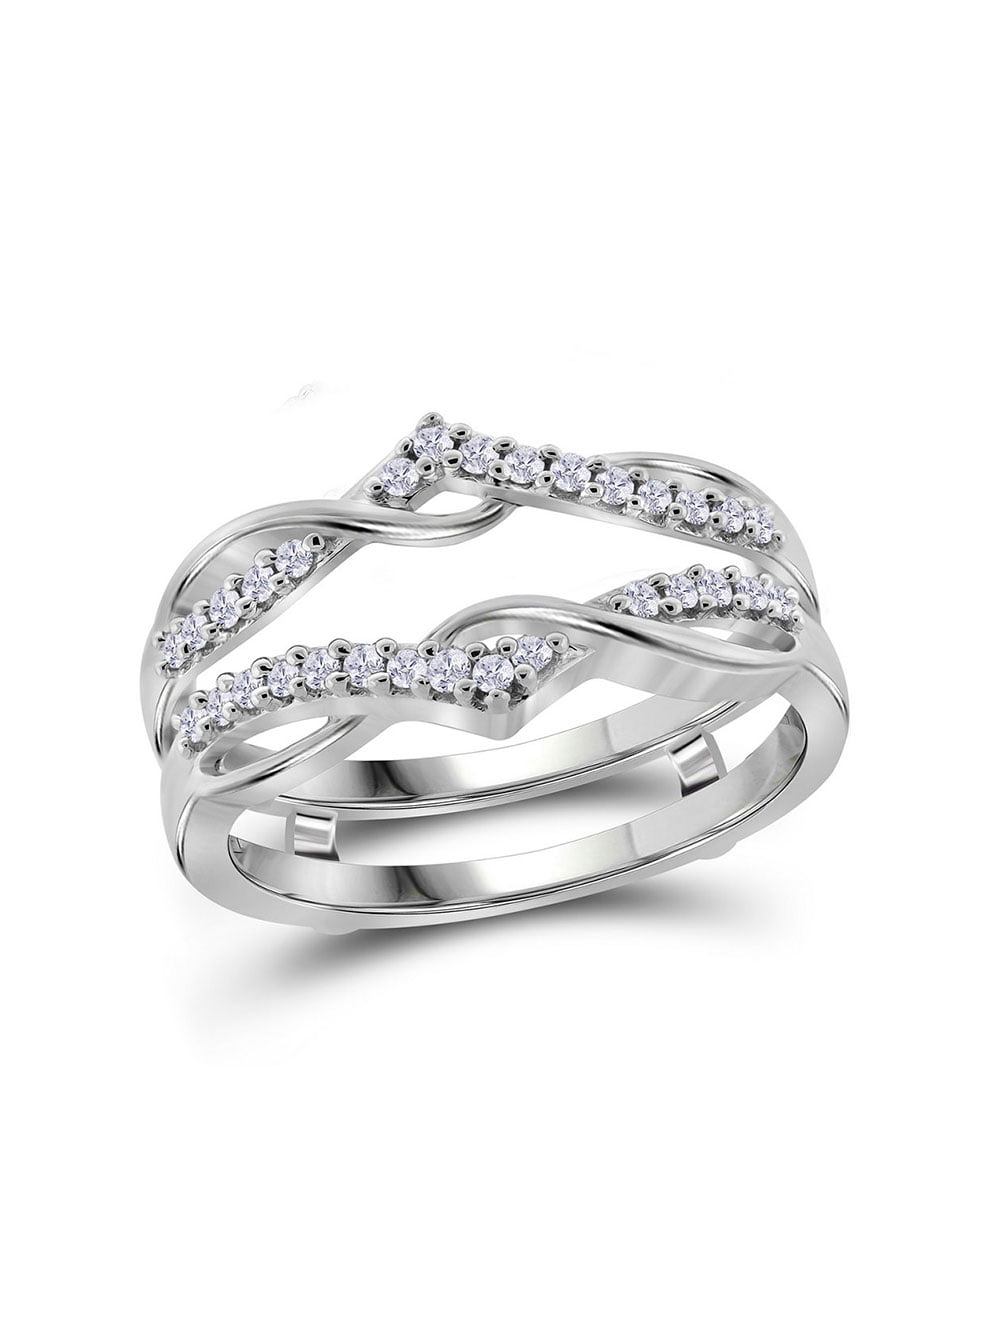 NEW 1/4ct Channel Set Solitaire Enhancer Simulated Diamonds Ring Guard Wrap 14k White Gold Plated 